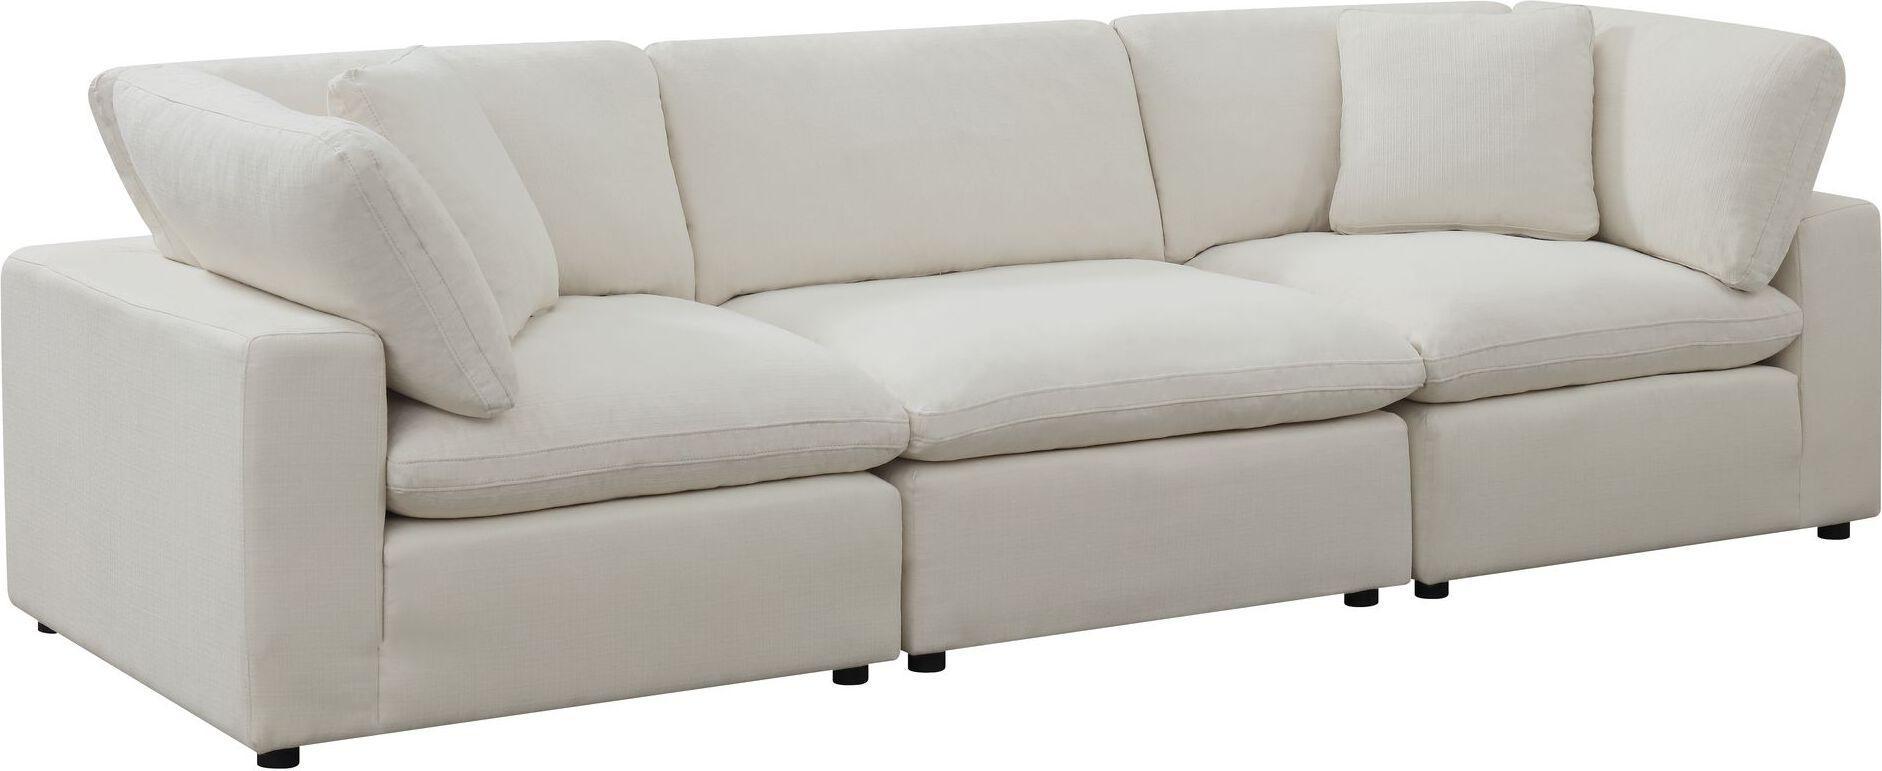 Elements Sectional Sofas - Haven 3 Piece Sectional Sofa White